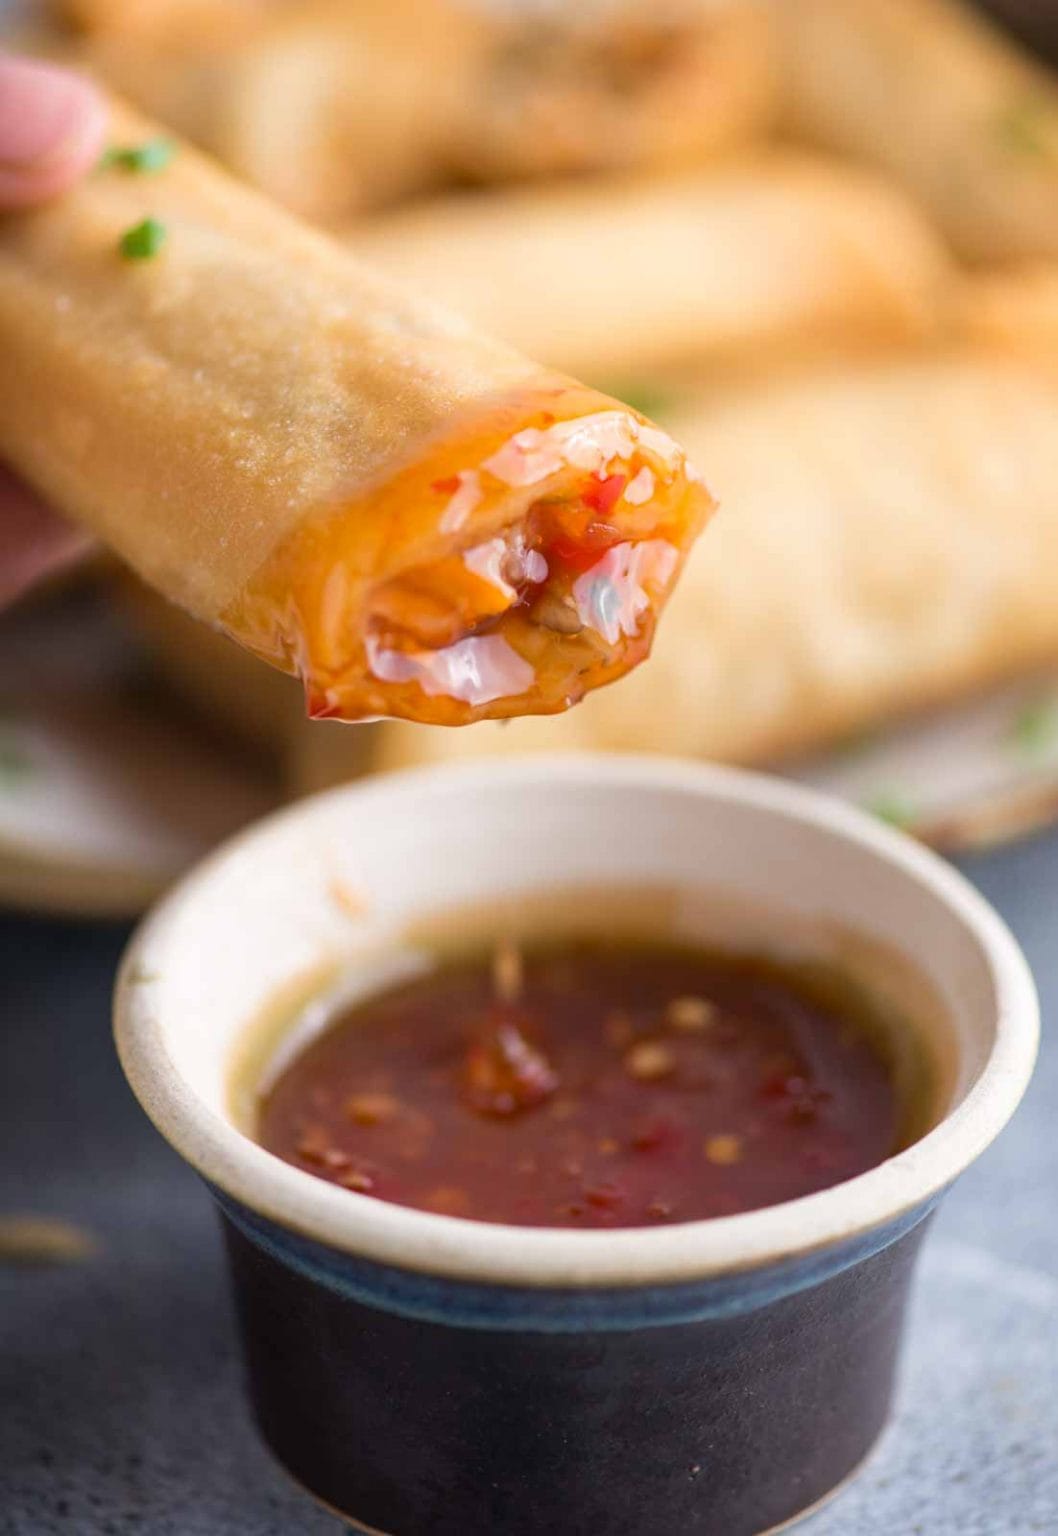 Crispy Spring Rolls Recipe - The flavours of kitchen